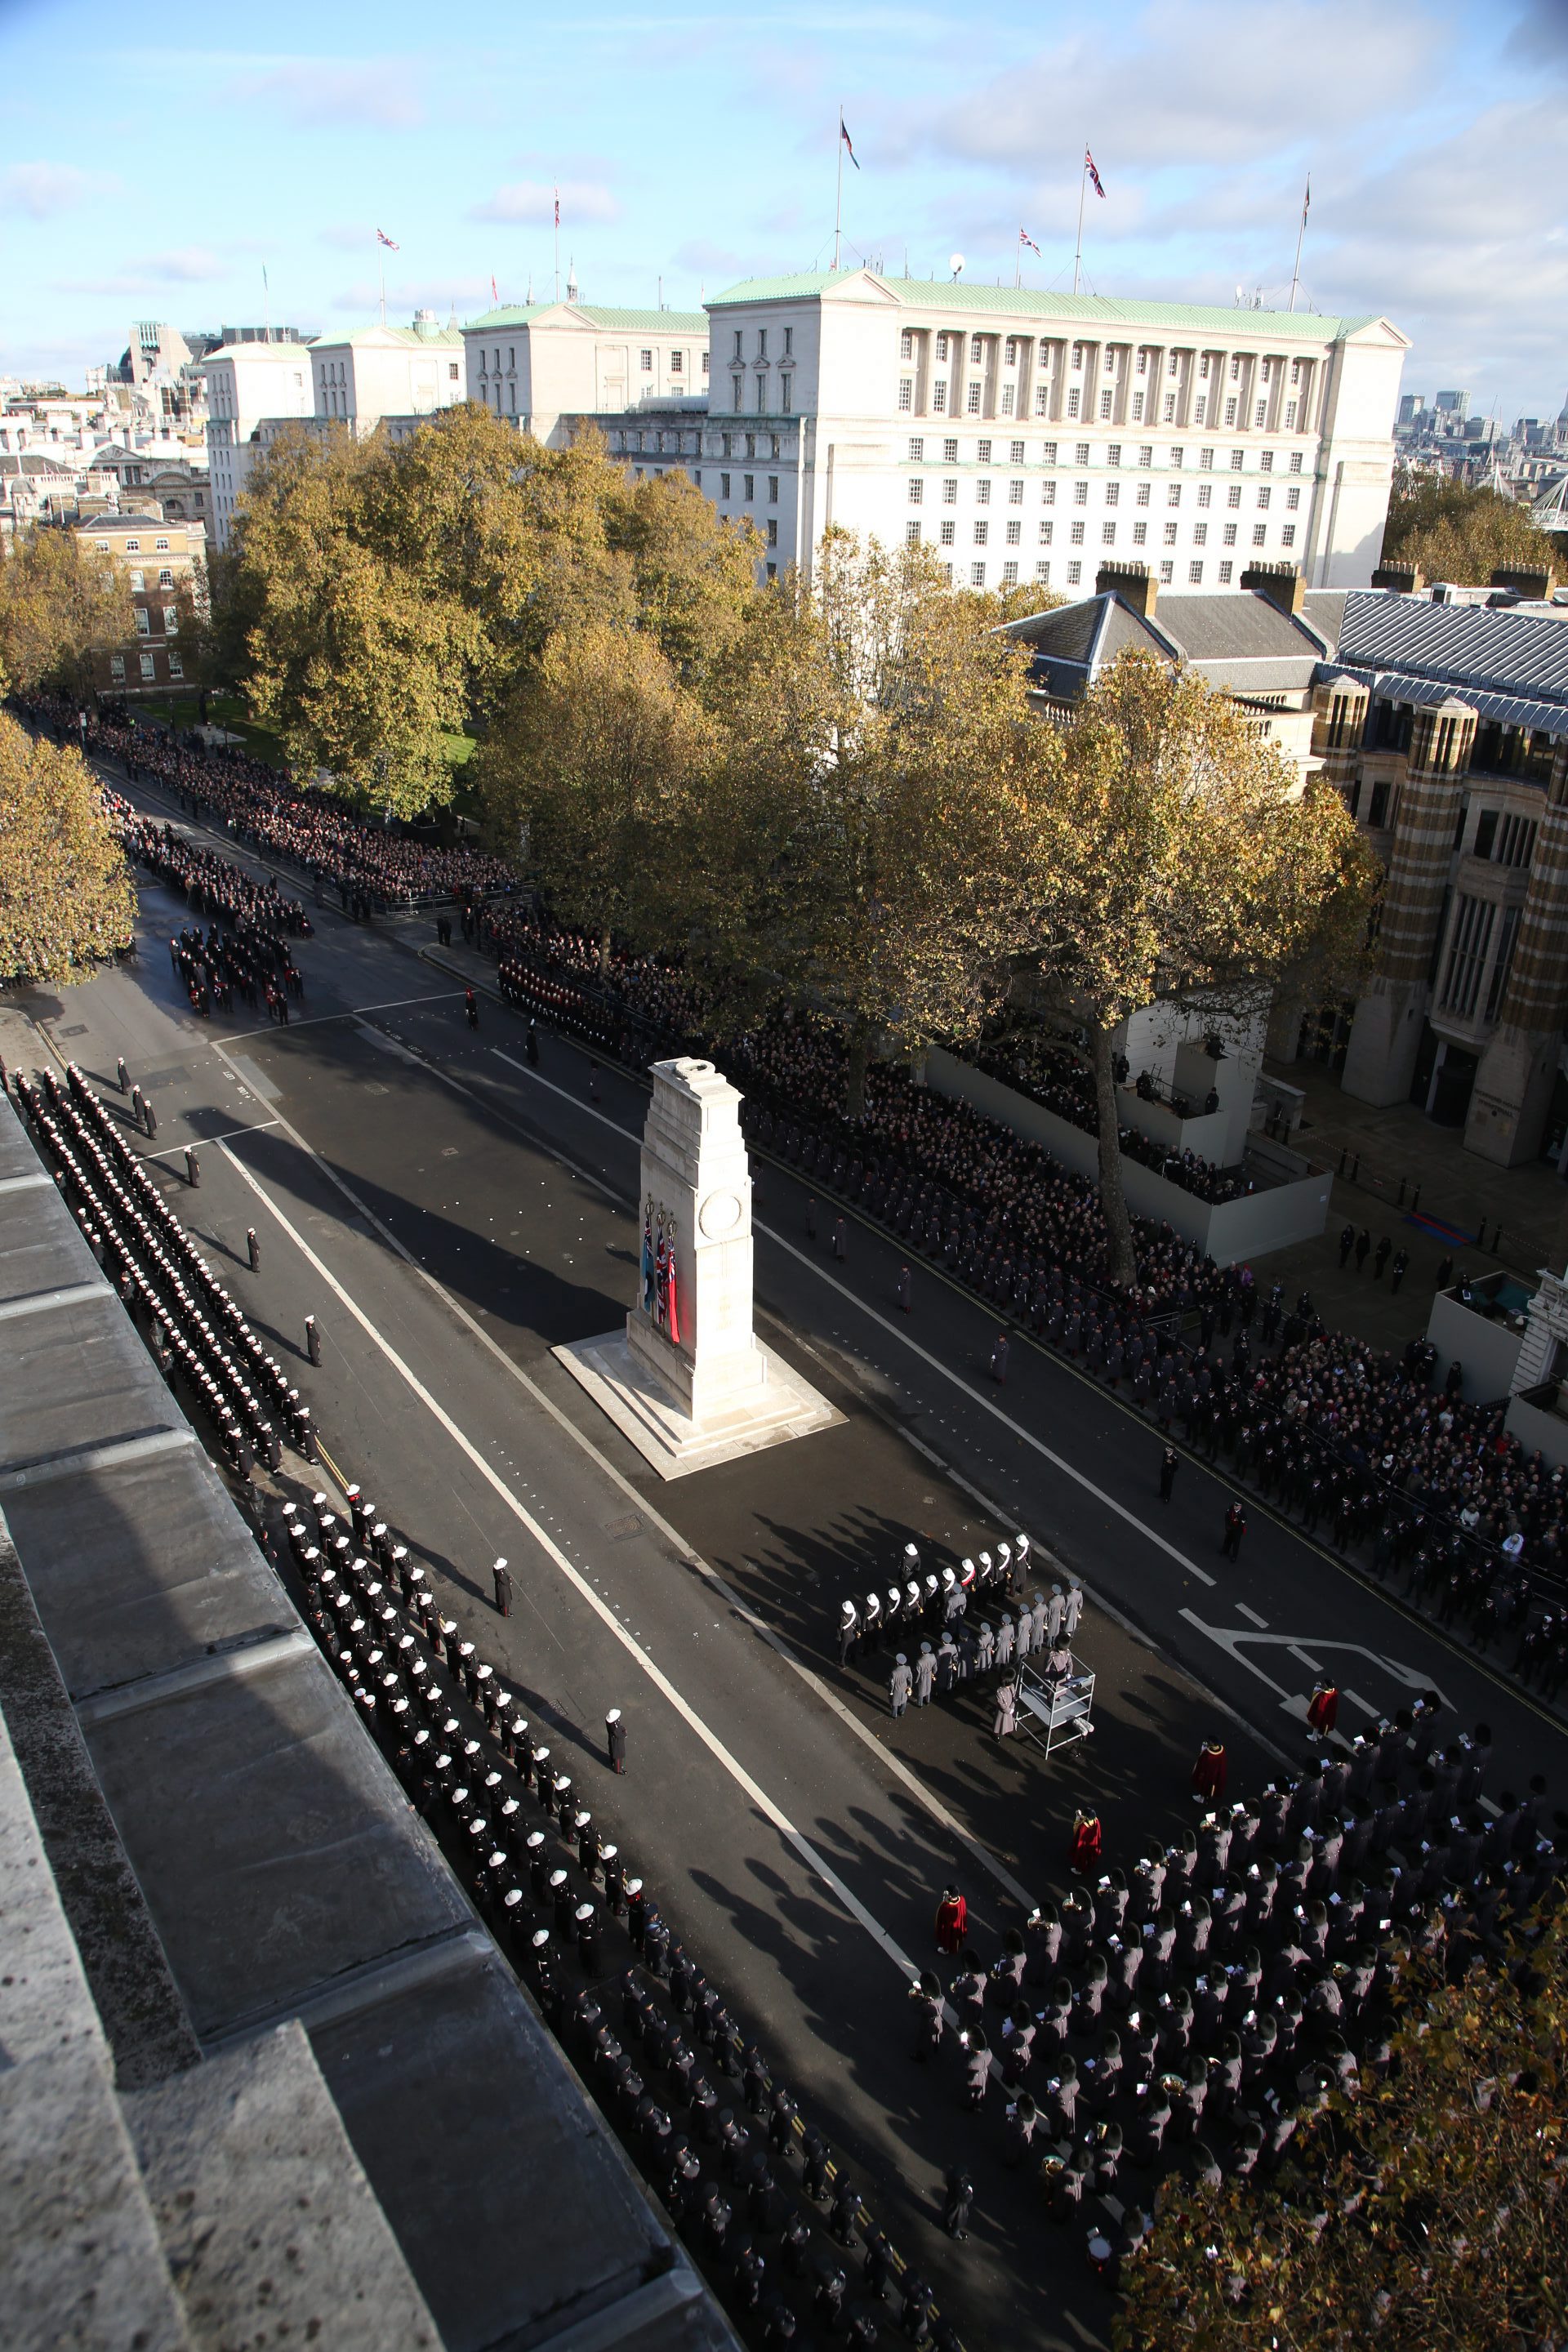 2016 Remembrance Sunday service at the Cenotaph